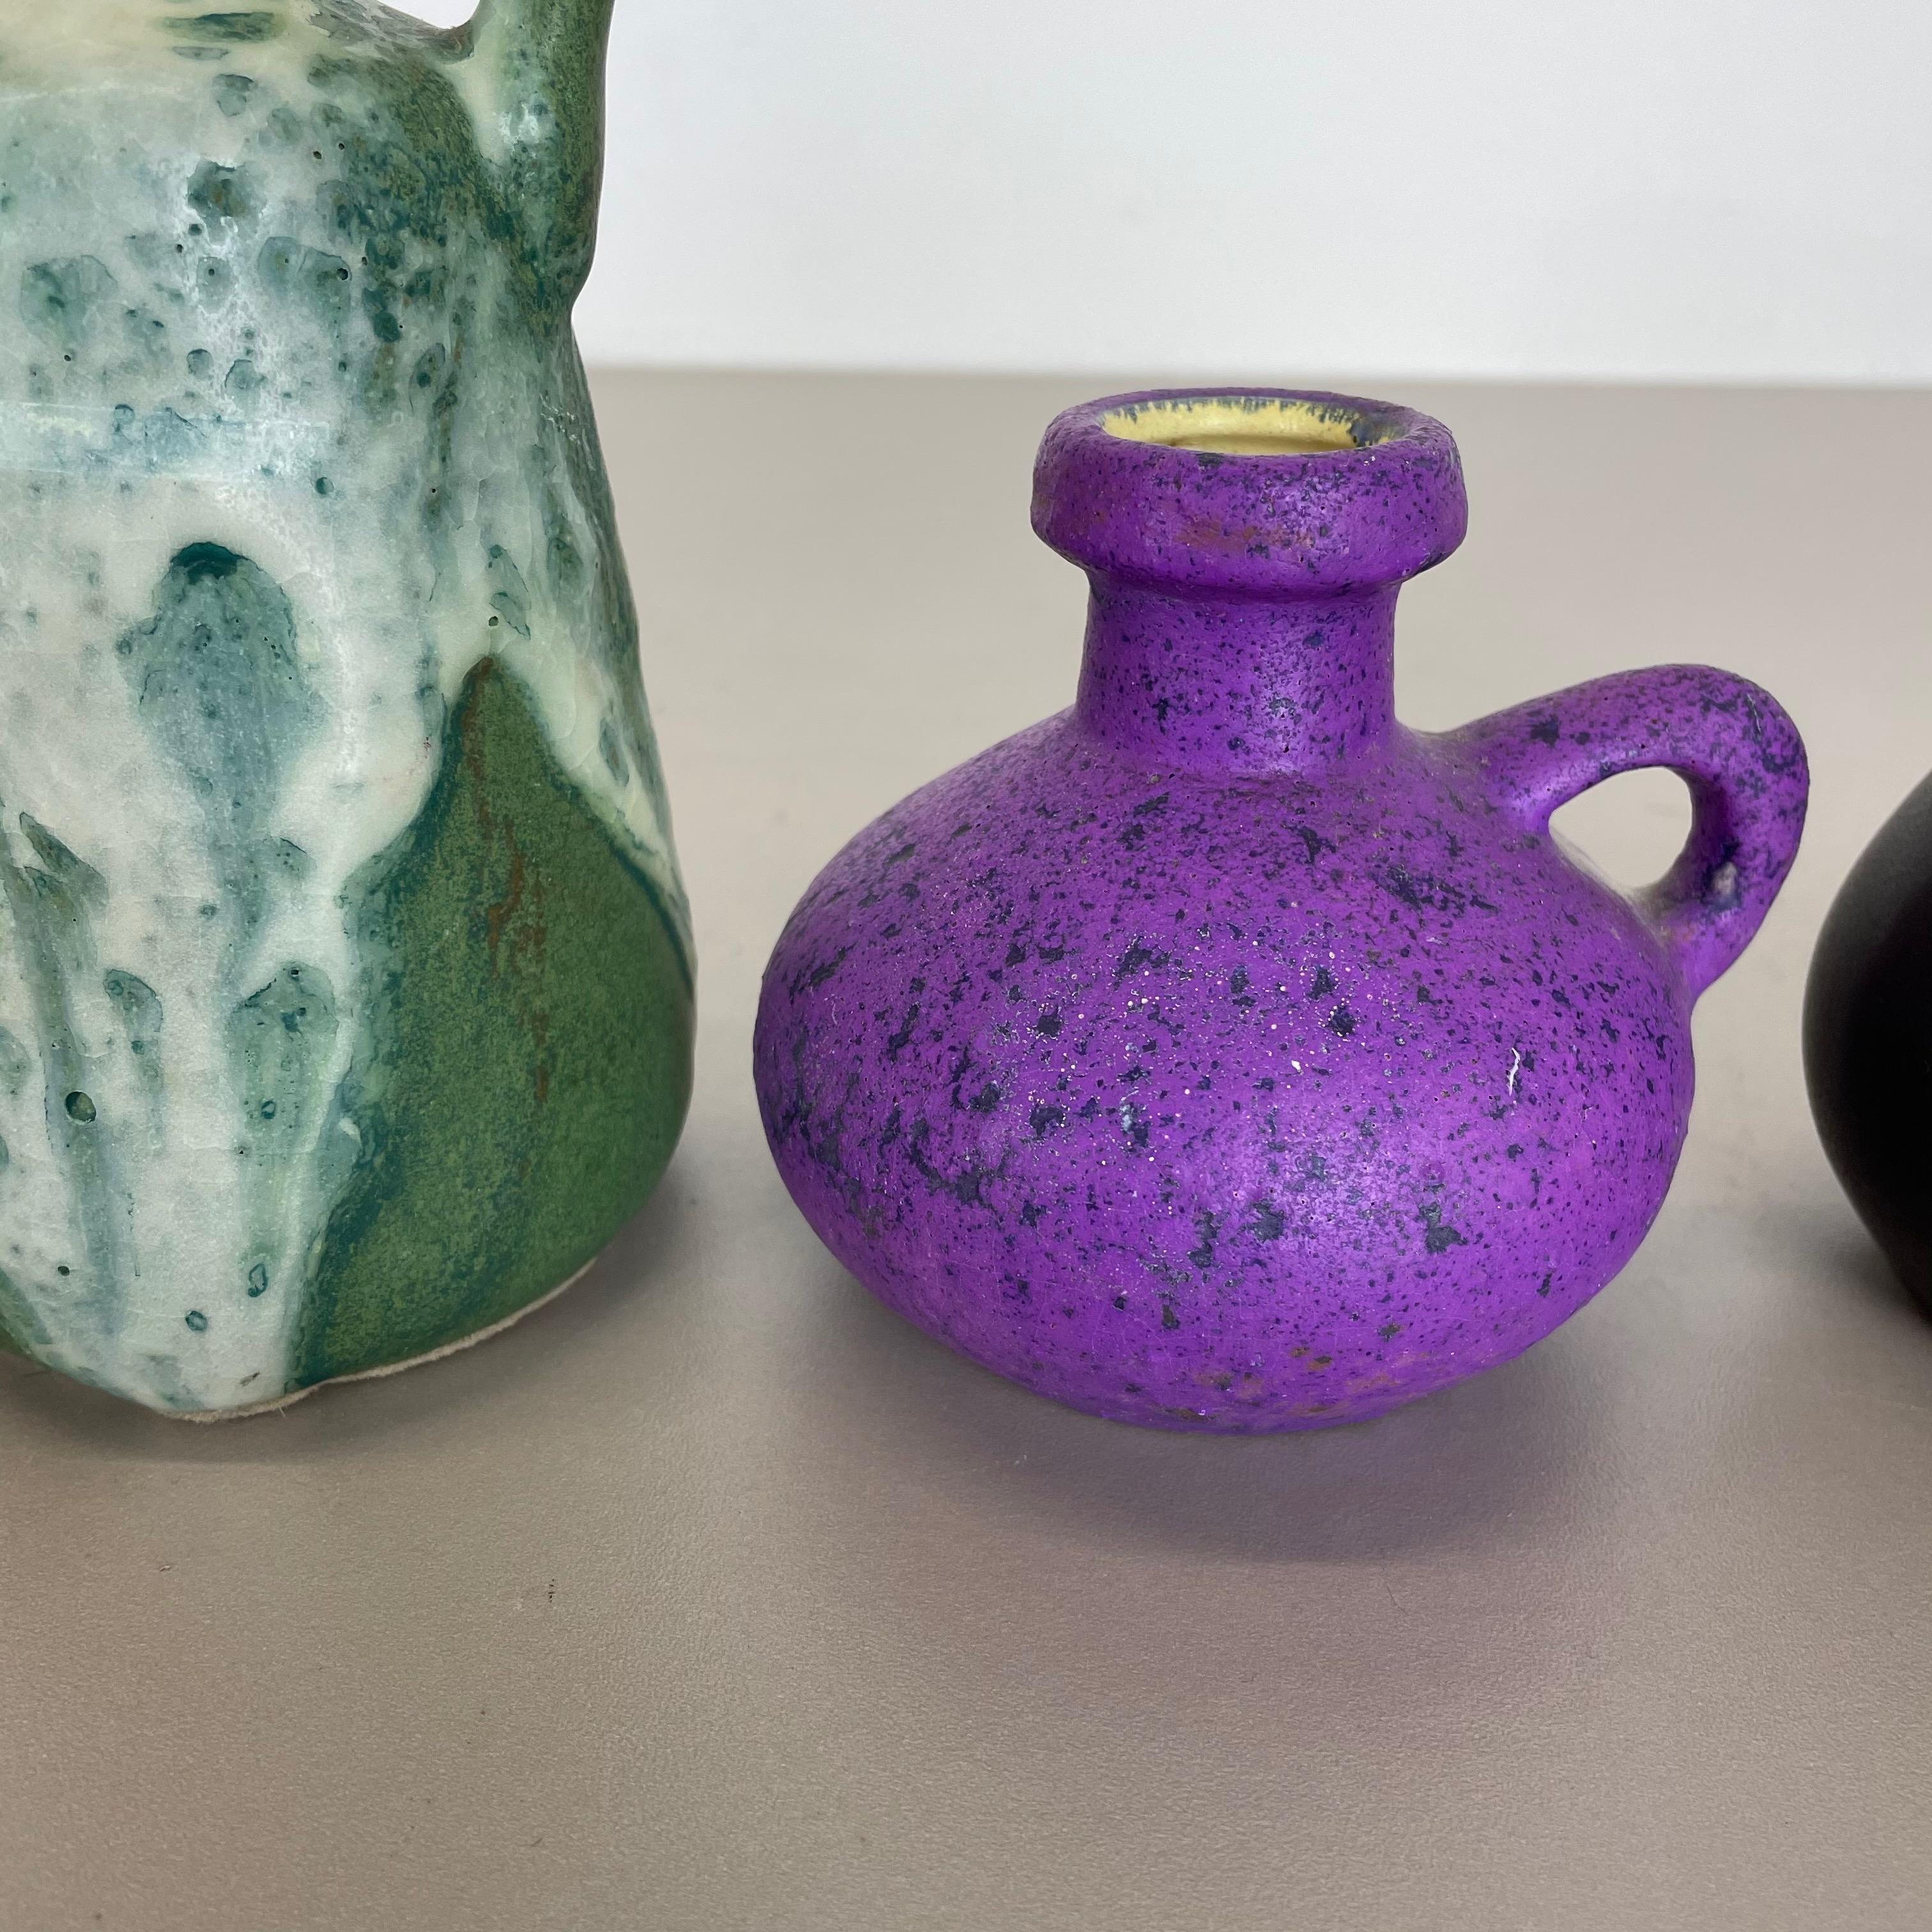 Set of 5 Multicolor Ceramic Pottery Vase Objects by Otto Keramik, Germany, 1970s For Sale 6